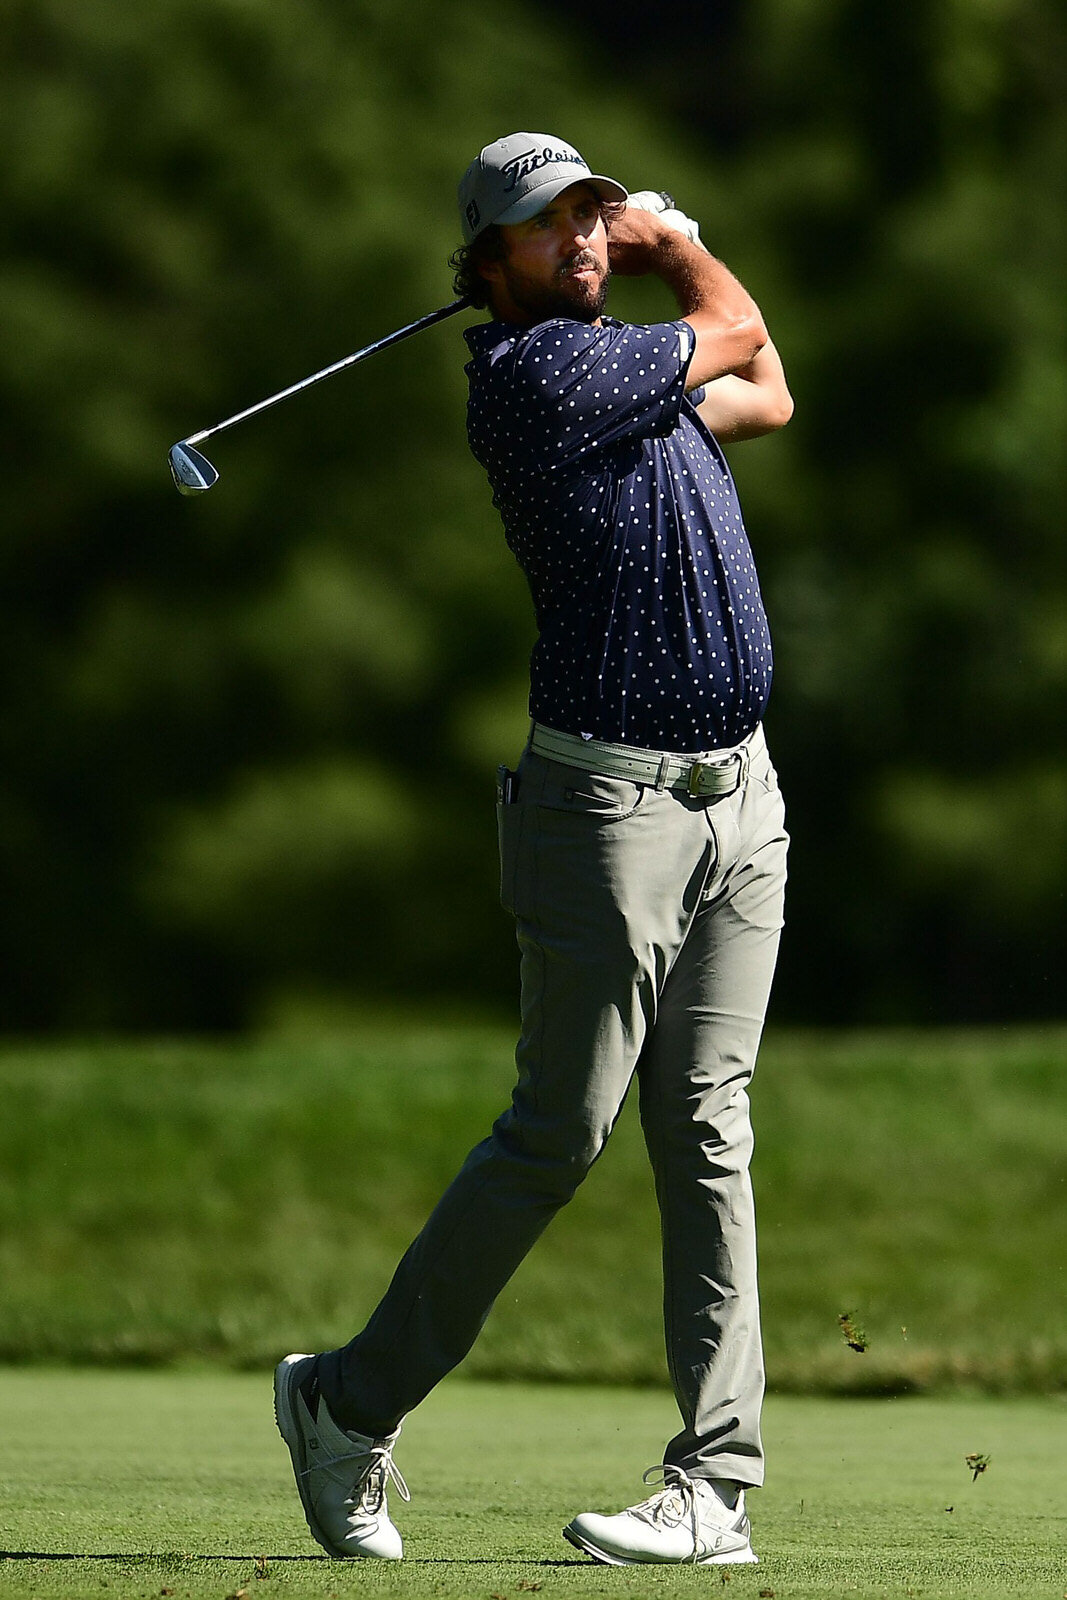  DETROIT, MICHIGAN - JULY 03: Mark Hubbard of the United Statesplays his shot from the 11th tee during the second round of the Rocket Mortgage Classic on July 03, 2020 at the Detroit Golf Club in Detroit, Michigan. (Photo by Stacy Revere/Getty Images